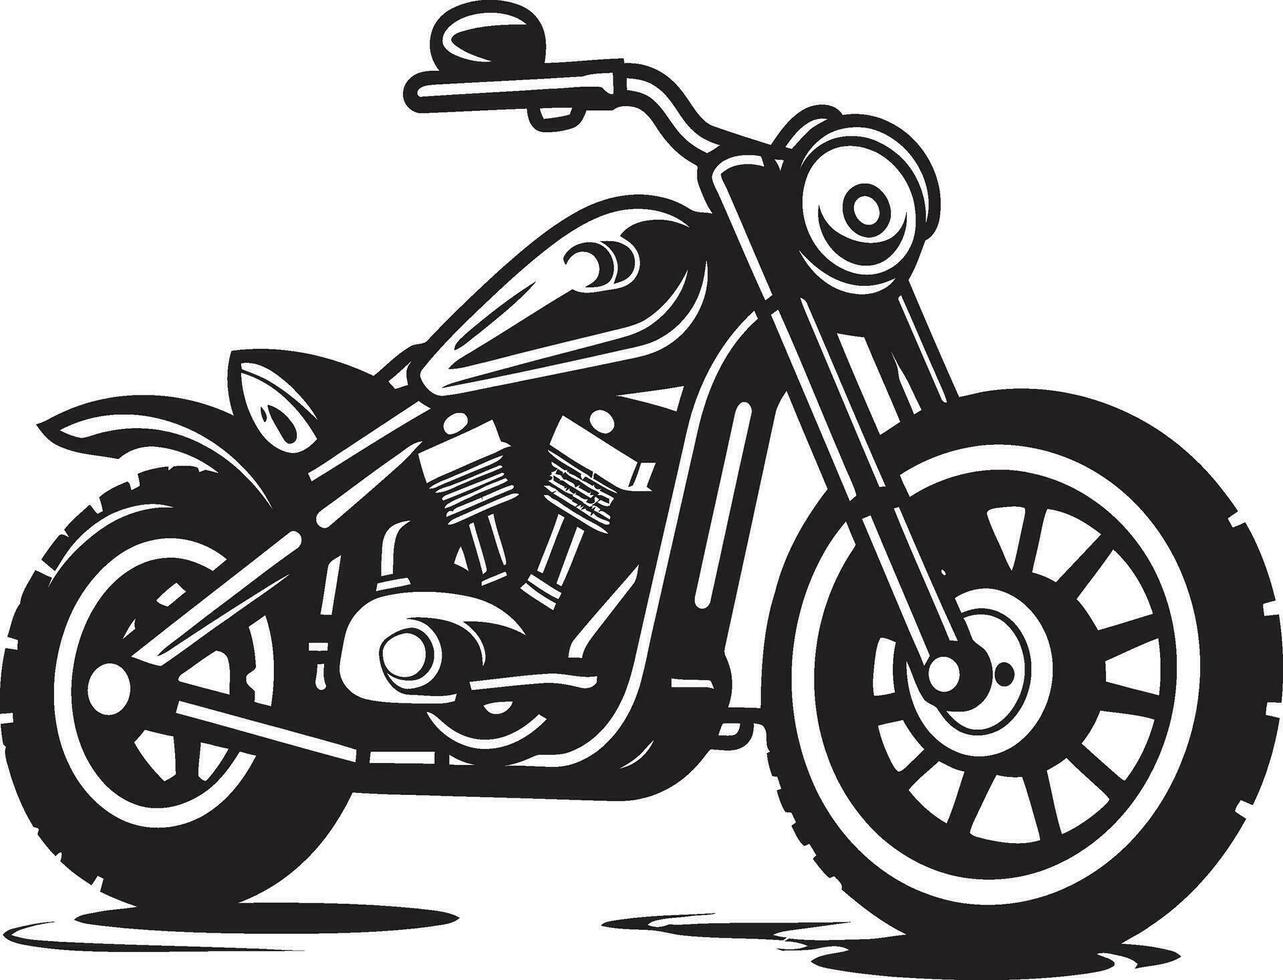 Speed Demon Vector Motorcycle Graphic Designs Chopper Customizations Vector Motorcycle Illustrations